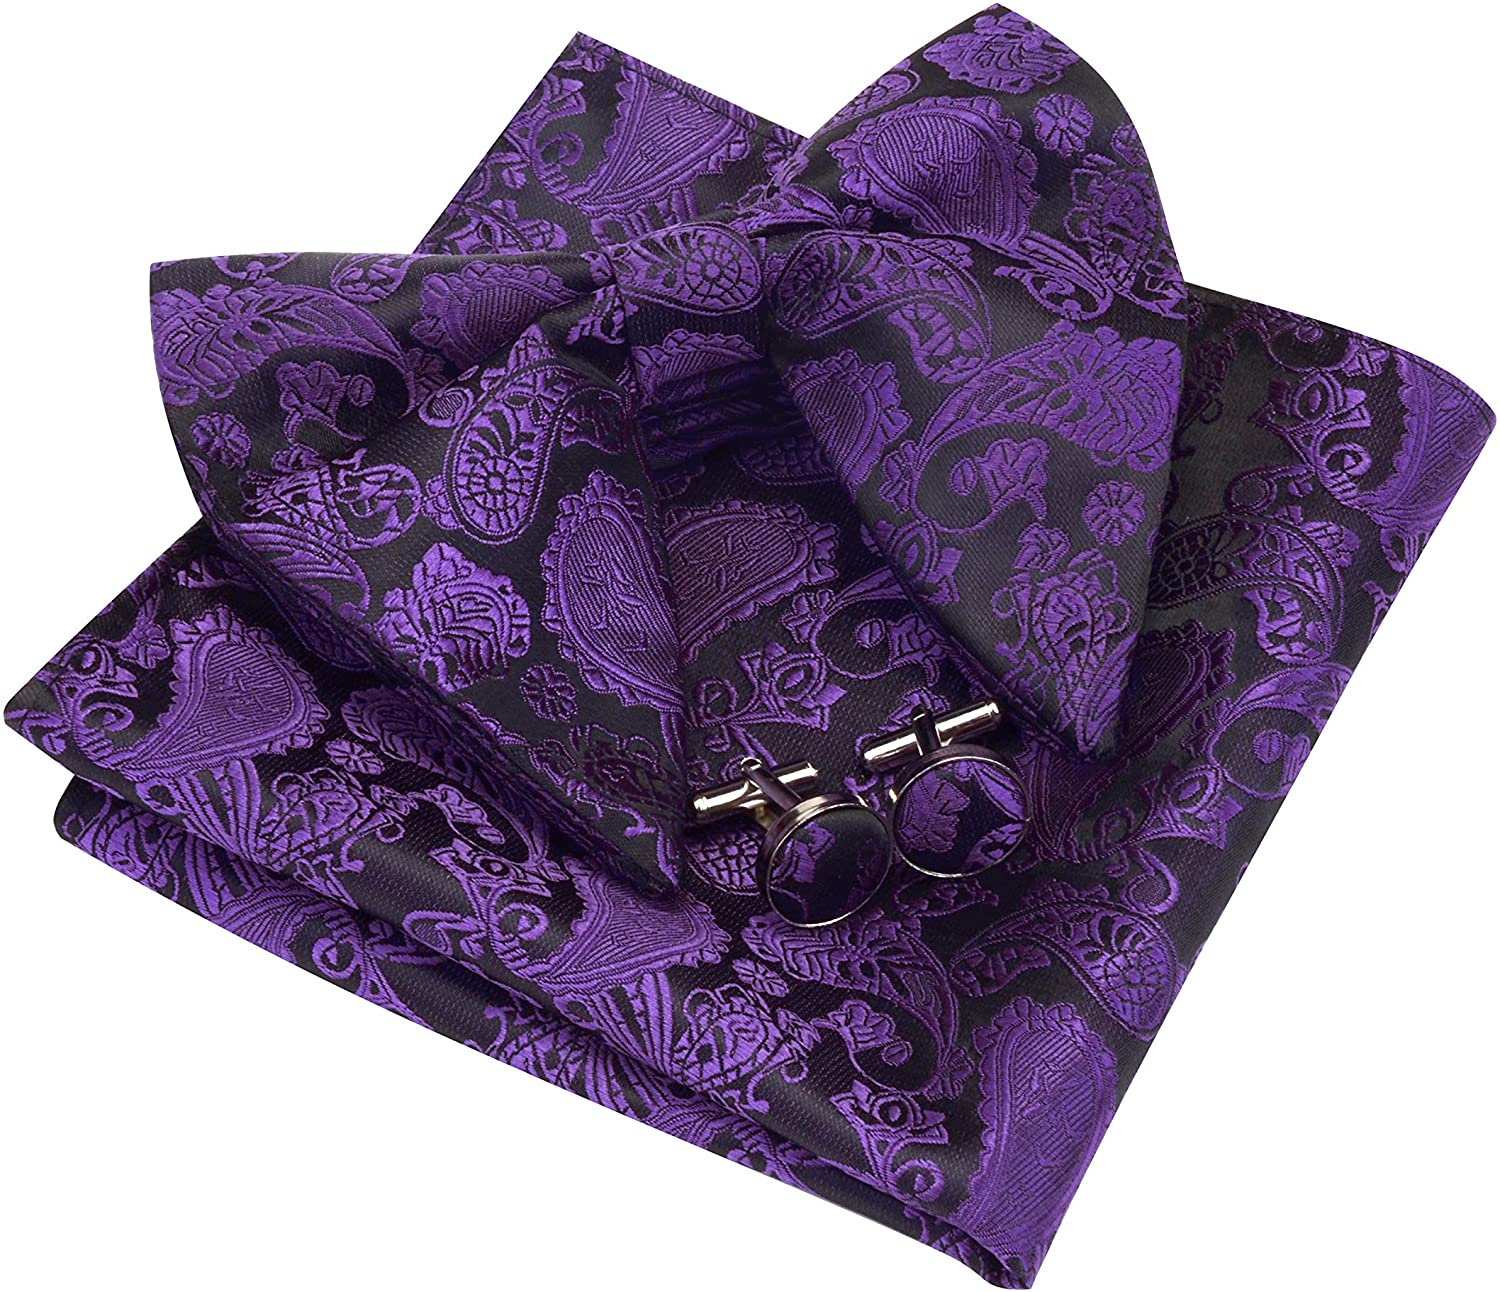 GUSLESON Fashion New Paisley Adjustable Pre-tied Big Bow Tie and Pocket Square Cufflink Set with Gift Box 